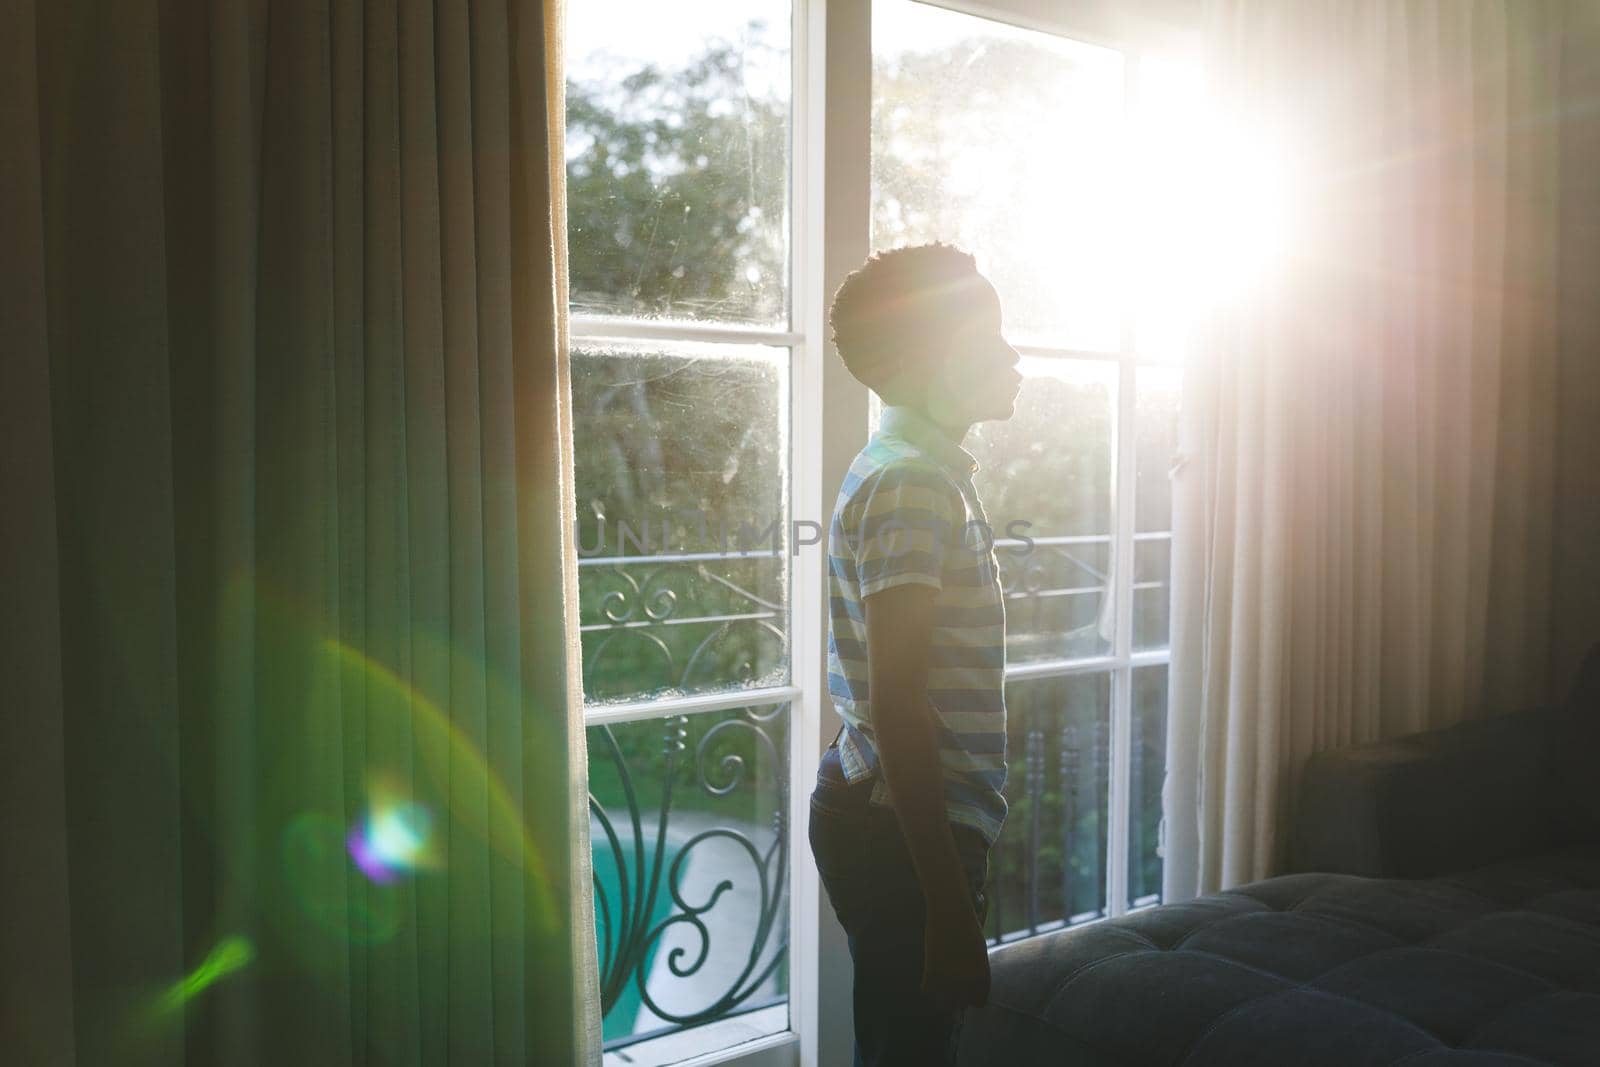 African american boy thinking and standing at window in sunny living room. spending time alone at home.